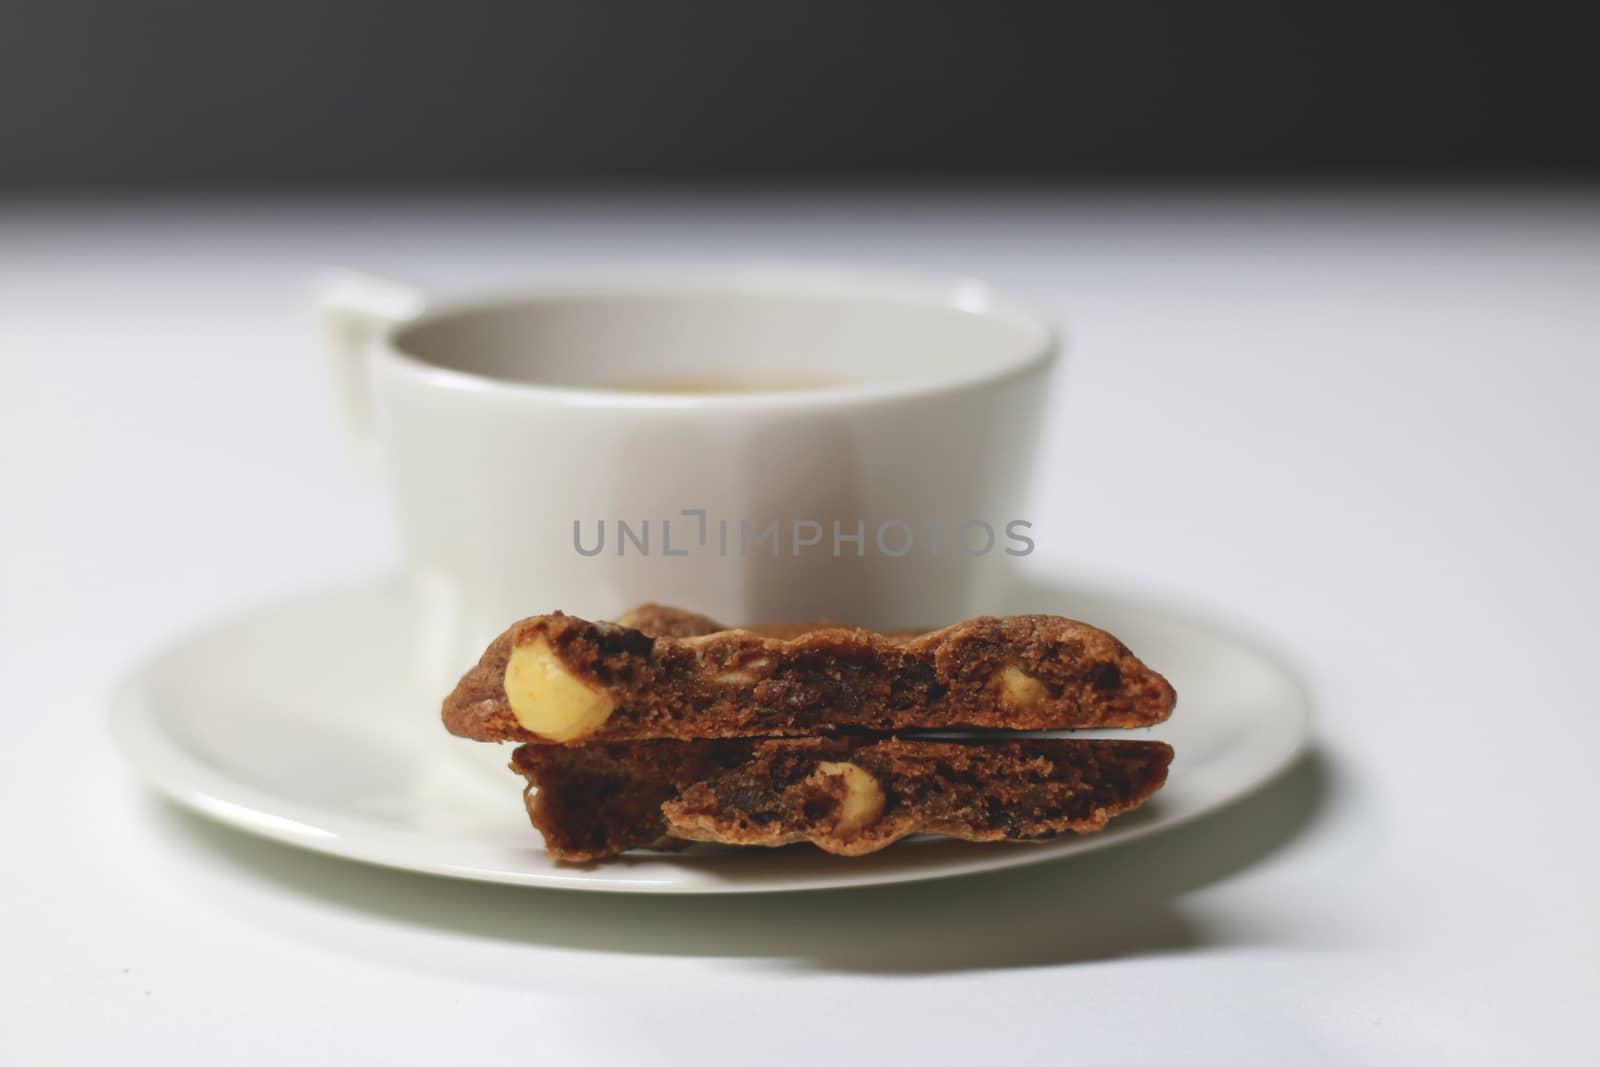 Cookie and cup of coffee on table